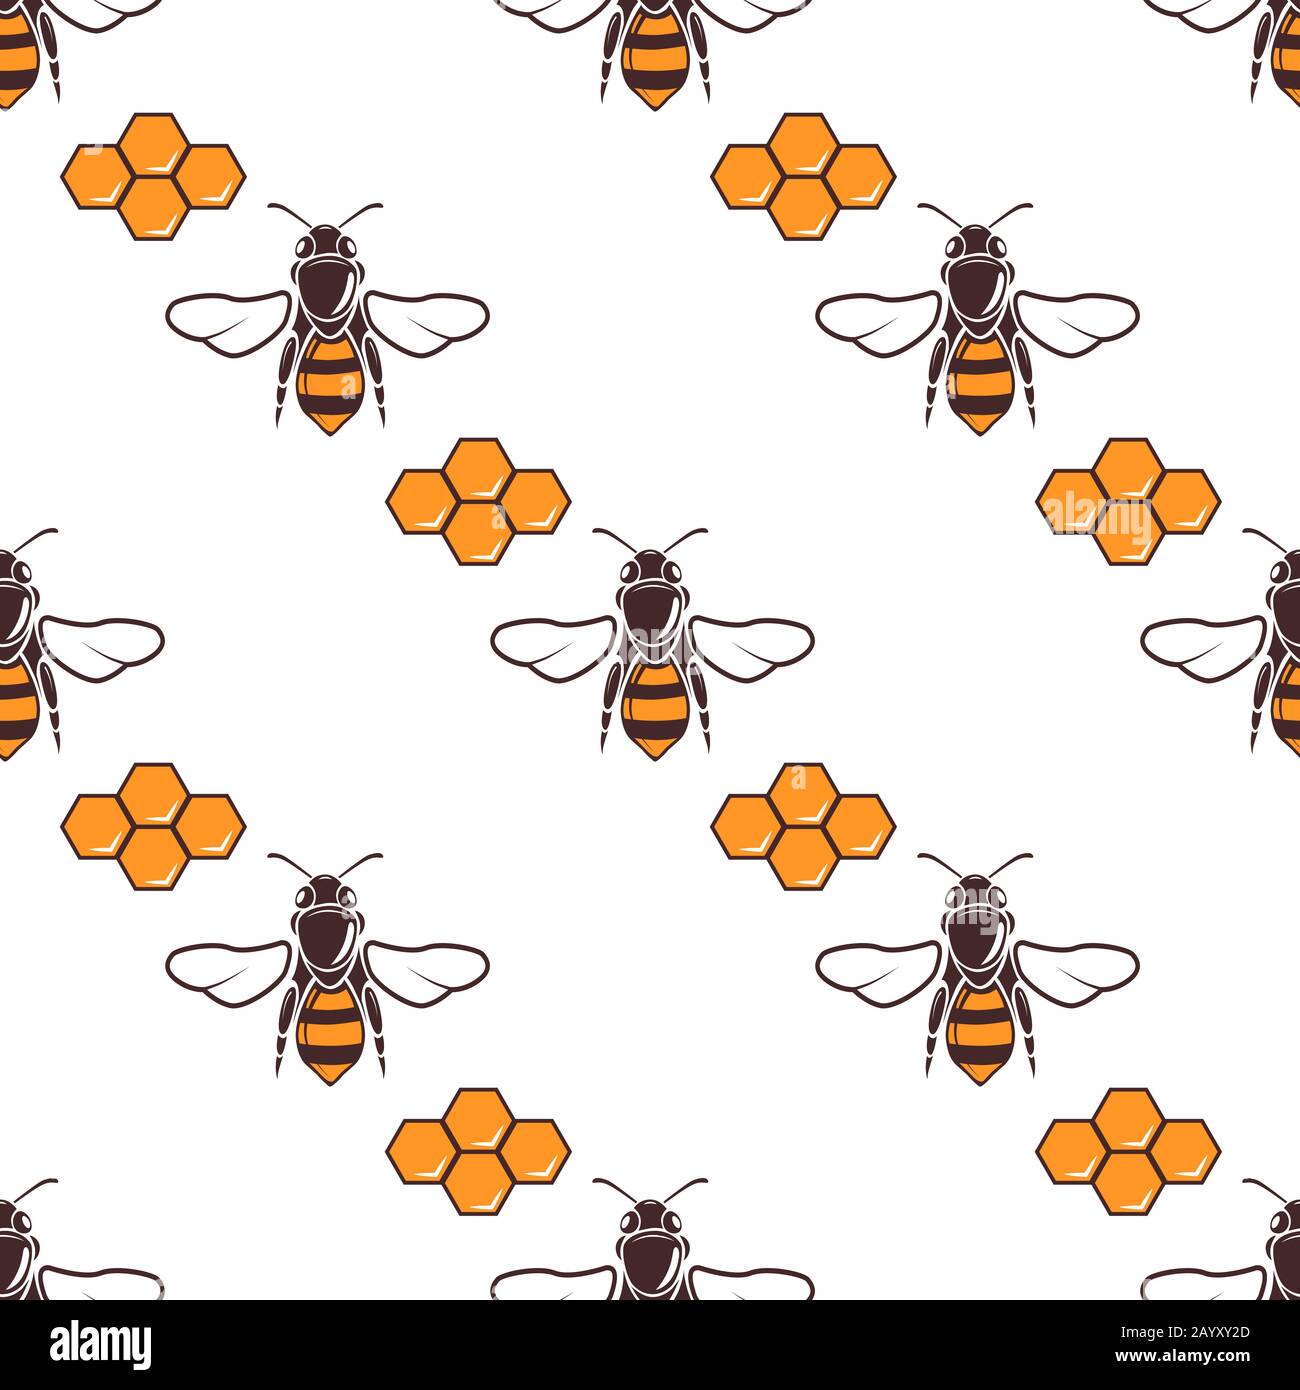 Bees, honey vector seamless pattern in brown and orange. Honeycomb natural background illustration Stock Vector